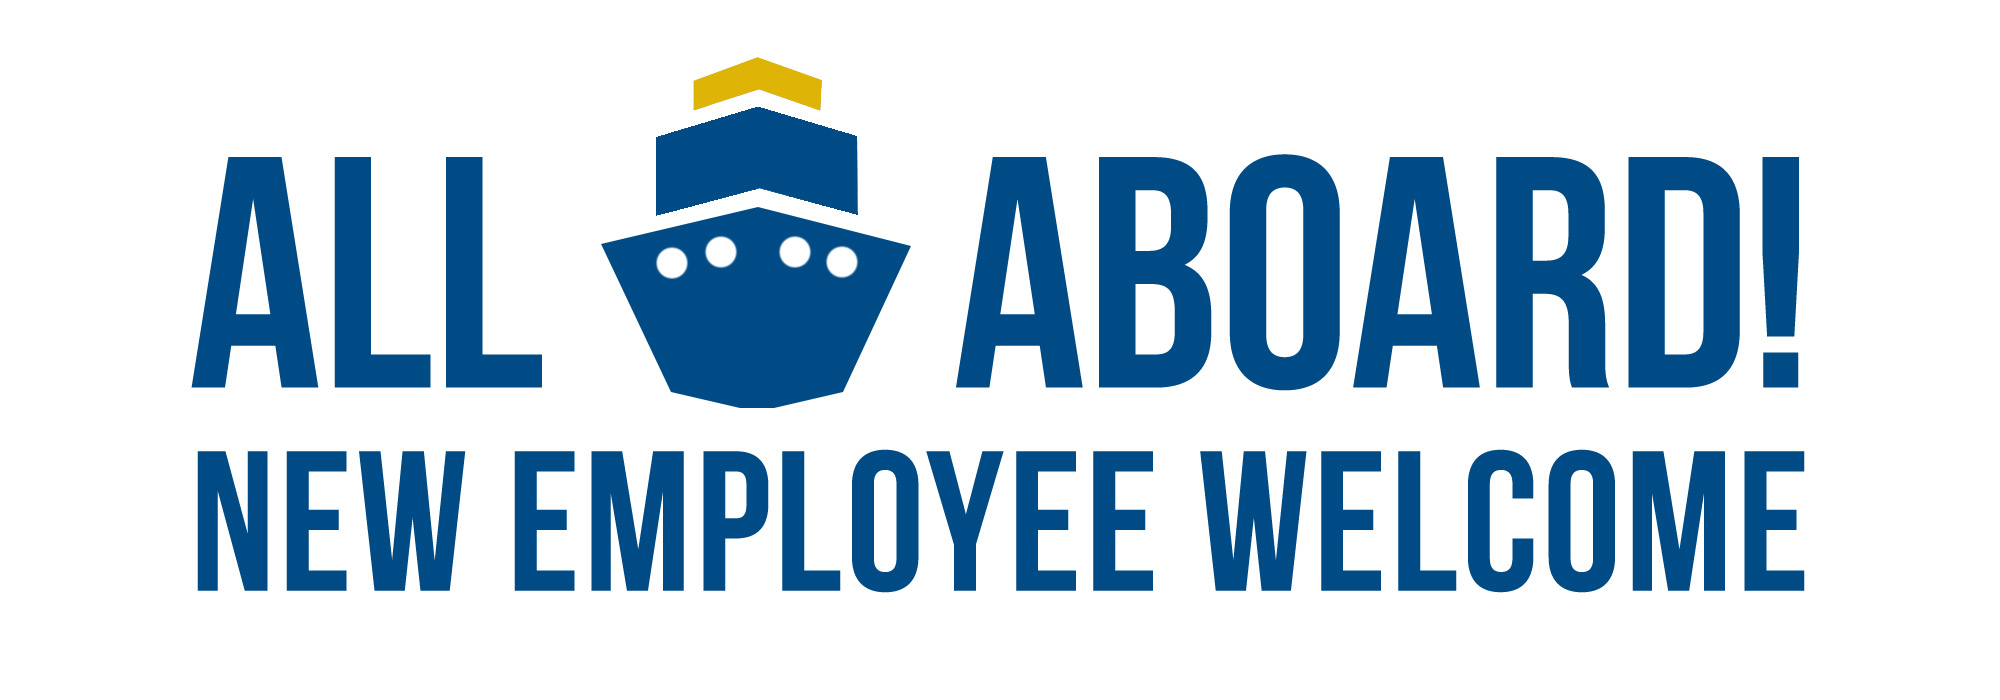  All Aboard - New Employee Welcome Graphic